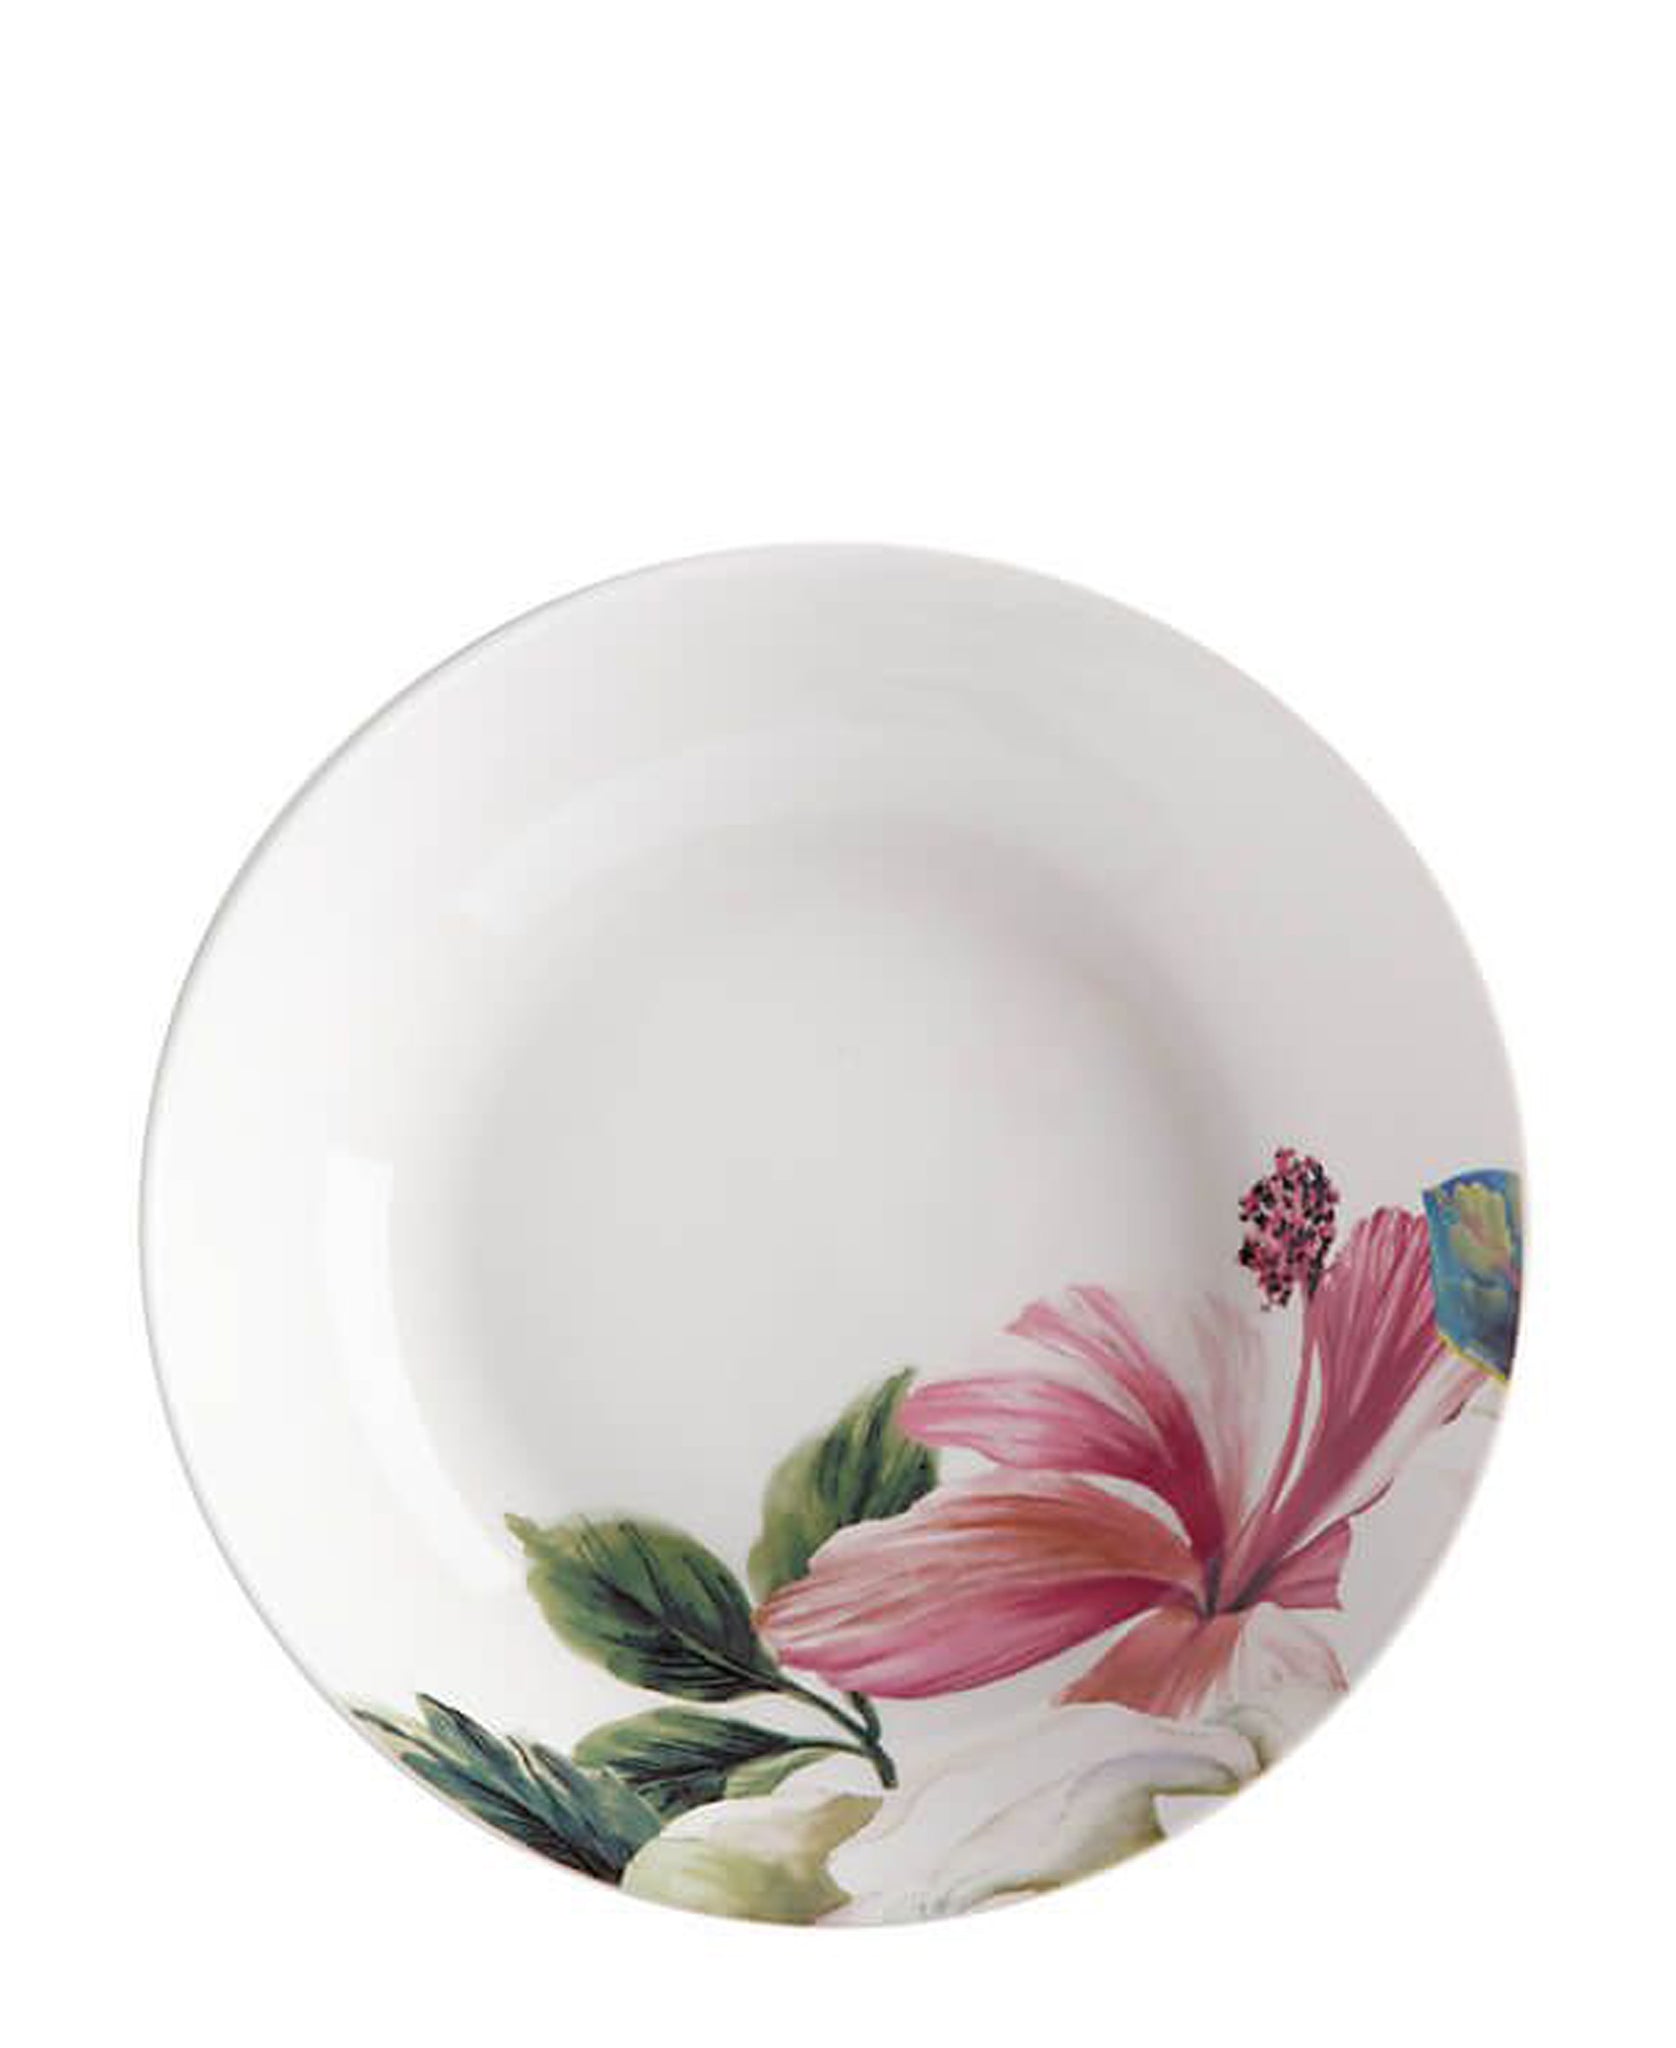 Maxwell & Williams Magnolia Side Plate 19cm - White & Pink